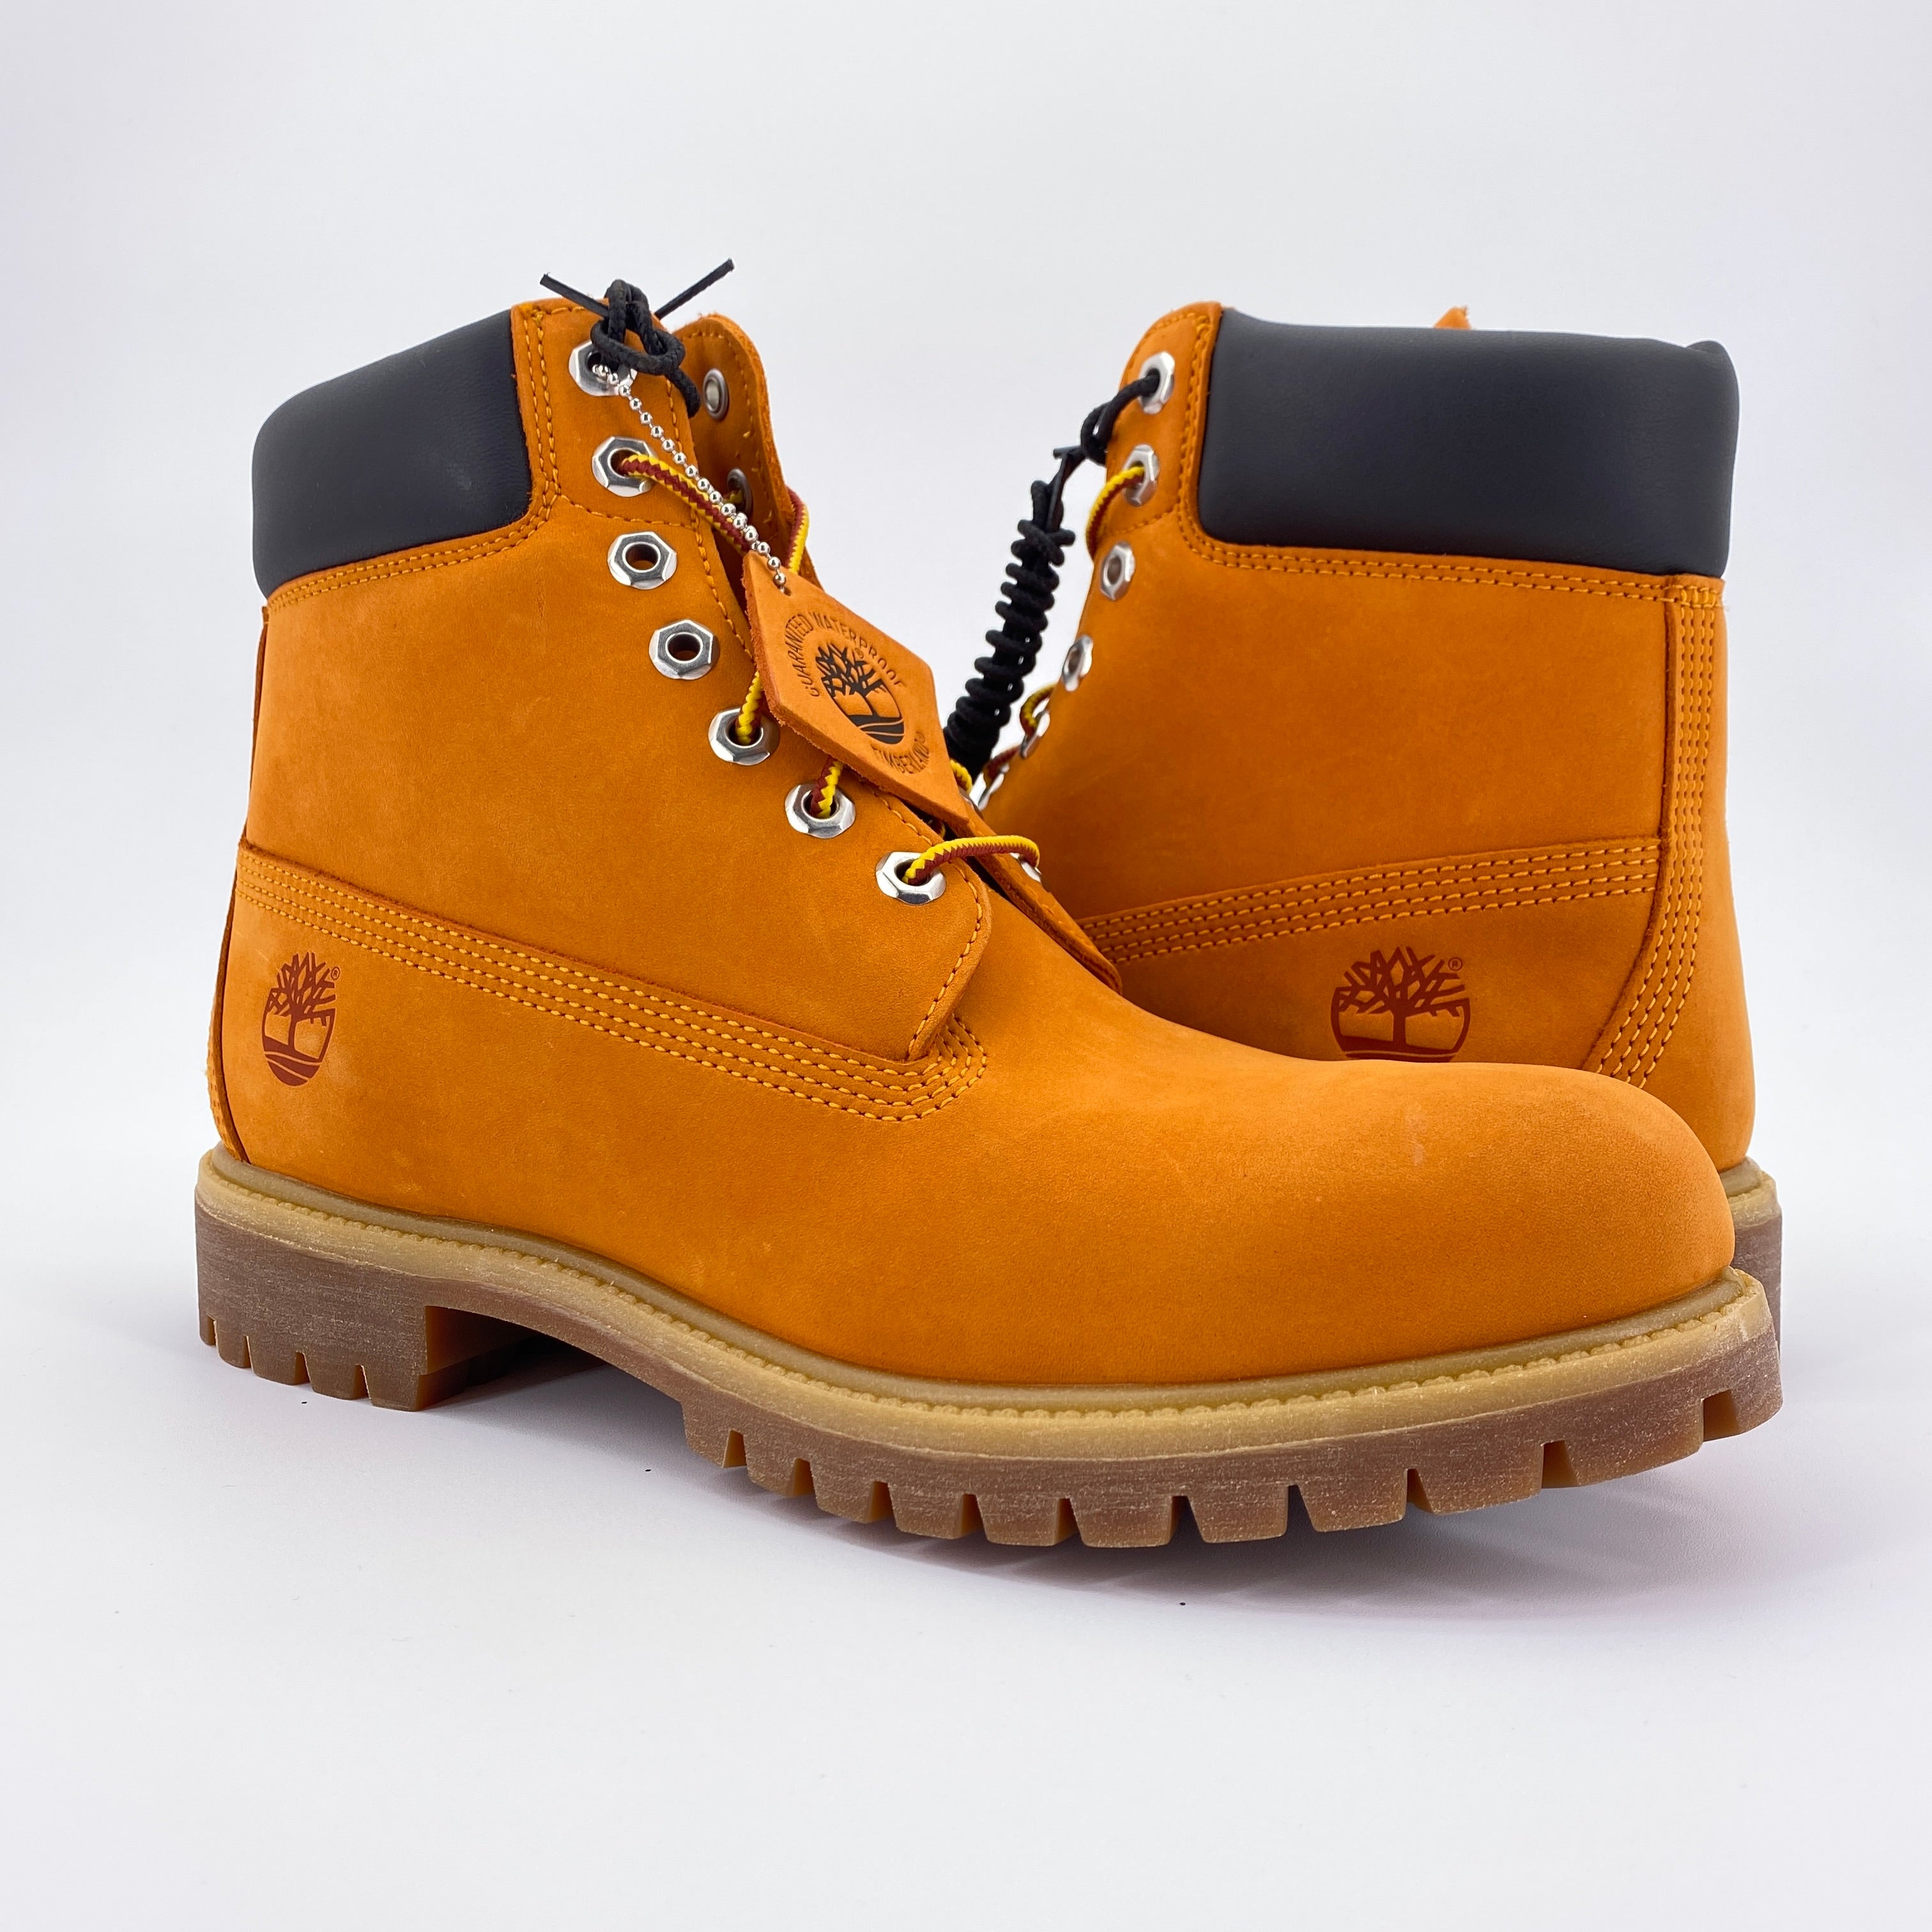 Timberland 6 Inch Boot "Dtlr Cheddar"  New Size 9.5